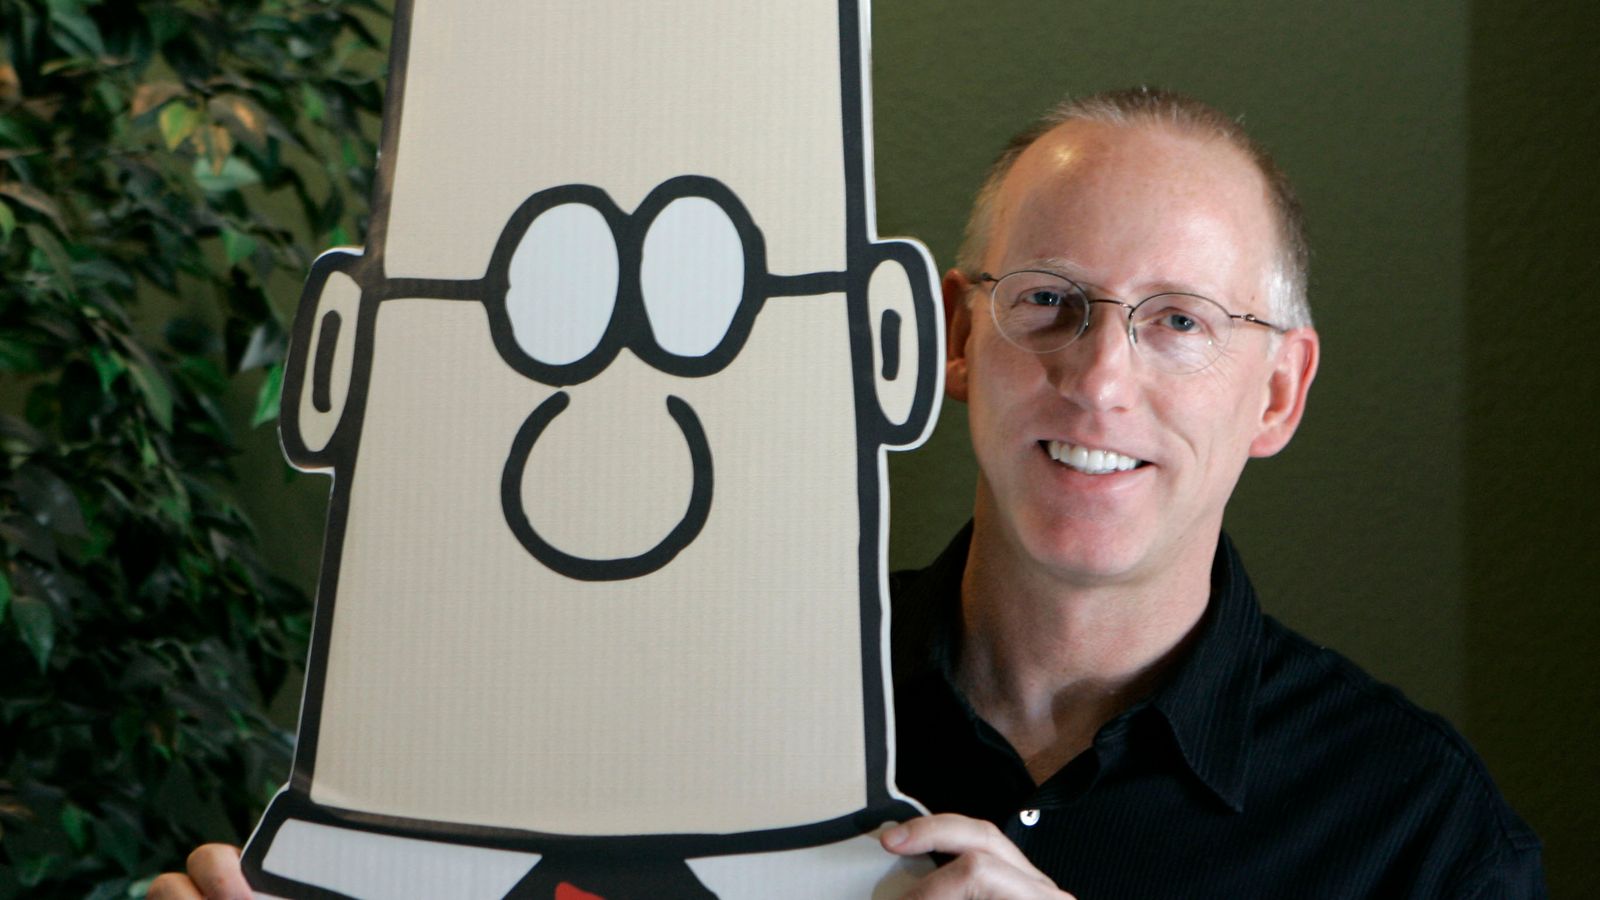 US publishers drop Dilbert office satire cartoon over 'racist' comments by creator